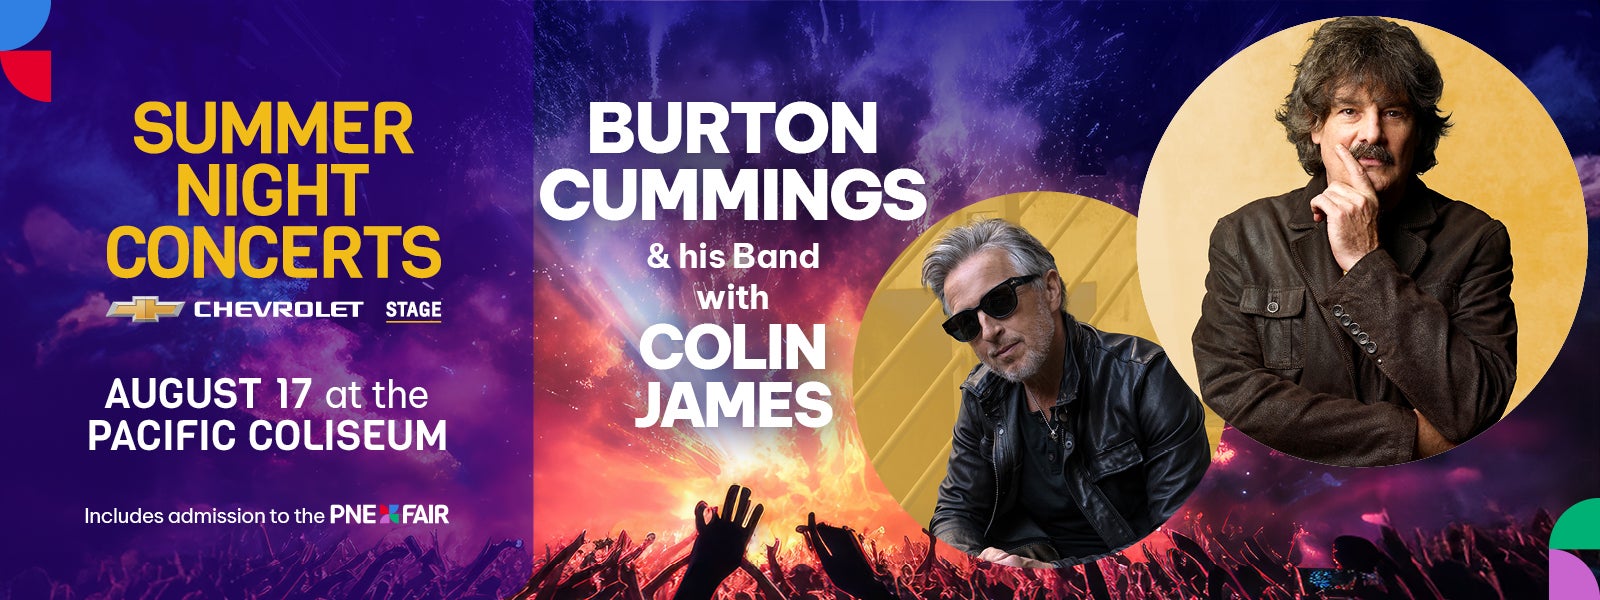 BURTON CUMMINGS & his Band with COLIN JAMES